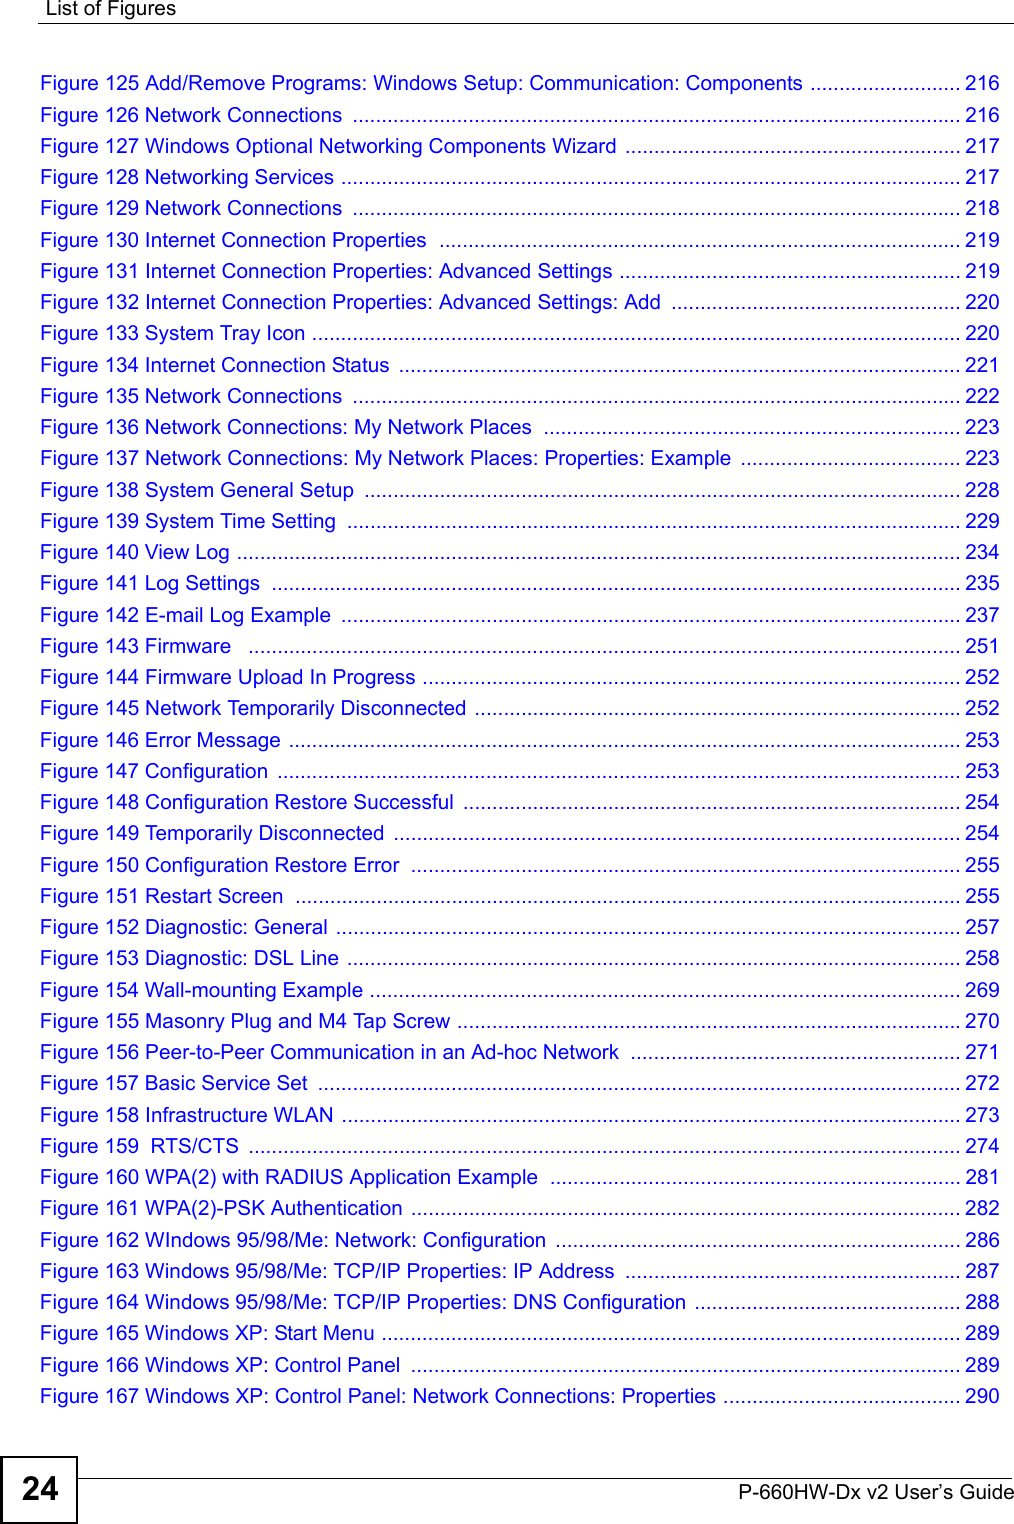 List of FiguresP-660HW-Dx v2 User’s Guide24Figure 125 Add/Remove Programs: Windows Setup: Communication: Components .......................... 216Figure 126 Network Connections  ......................................................................................................... 216Figure 127 Windows Optional Networking Components Wizard .......................................................... 217Figure 128 Networking Services ........................................................................................................... 217Figure 129 Network Connections  ......................................................................................................... 218Figure 130 Internet Connection Properties  .......................................................................................... 219Figure 131 Internet Connection Properties: Advanced Settings ........................................................... 219Figure 132 Internet Connection Properties: Advanced Settings: Add  .................................................. 220Figure 133 System Tray Icon ................................................................................................................ 220Figure 134 Internet Connection Status  ................................................................................................. 221Figure 135 Network Connections  ......................................................................................................... 222Figure 136 Network Connections: My Network Places  ........................................................................ 223Figure 137 Network Connections: My Network Places: Properties: Example  ...................................... 223Figure 138 System General Setup  ....................................................................................................... 228Figure 139 System Time Setting  .......................................................................................................... 229Figure 140 View Log ............................................................................................................................. 234Figure 141 Log Settings  ....................................................................................................................... 235Figure 142 E-mail Log Example  ........................................................................................................... 237Figure 143 Firmware   ........................................................................................................................... 251Figure 144 Firmware Upload In Progress ............................................................................................. 252Figure 145 Network Temporarily Disconnected ....................................................................................252Figure 146 Error Message .................................................................................................................... 253Figure 147 Configuration  ...................................................................................................................... 253Figure 148 Configuration Restore Successful  ...................................................................................... 254Figure 149 Temporarily Disconnected .................................................................................................. 254Figure 150 Configuration Restore Error  ............................................................................................... 255Figure 151 Restart Screen  ................................................................................................................... 255Figure 152 Diagnostic: General ............................................................................................................ 257Figure 153 Diagnostic: DSL Line .......................................................................................................... 258Figure 154 Wall-mounting Example ...................................................................................................... 269Figure 155 Masonry Plug and M4 Tap Screw .......................................................................................270Figure 156 Peer-to-Peer Communication in an Ad-hoc Network  ......................................................... 271Figure 157 Basic Service Set  ............................................................................................................... 272Figure 158 Infrastructure WLAN ........................................................................................................... 273Figure 159  RTS/CTS  ........................................................................................................................... 274Figure 160 WPA(2) with RADIUS Application Example ....................................................................... 281Figure 161 WPA(2)-PSK Authentication ............................................................................................... 282Figure 162 WIndows 95/98/Me: Network: Configuration  ...................................................................... 286Figure 163 Windows 95/98/Me: TCP/IP Properties: IP Address  .......................................................... 287Figure 164 Windows 95/98/Me: TCP/IP Properties: DNS Configuration .............................................. 288Figure 165 Windows XP: Start Menu .................................................................................................... 289Figure 166 Windows XP: Control Panel  ............................................................................................... 289Figure 167 Windows XP: Control Panel: Network Connections: Properties ......................................... 290